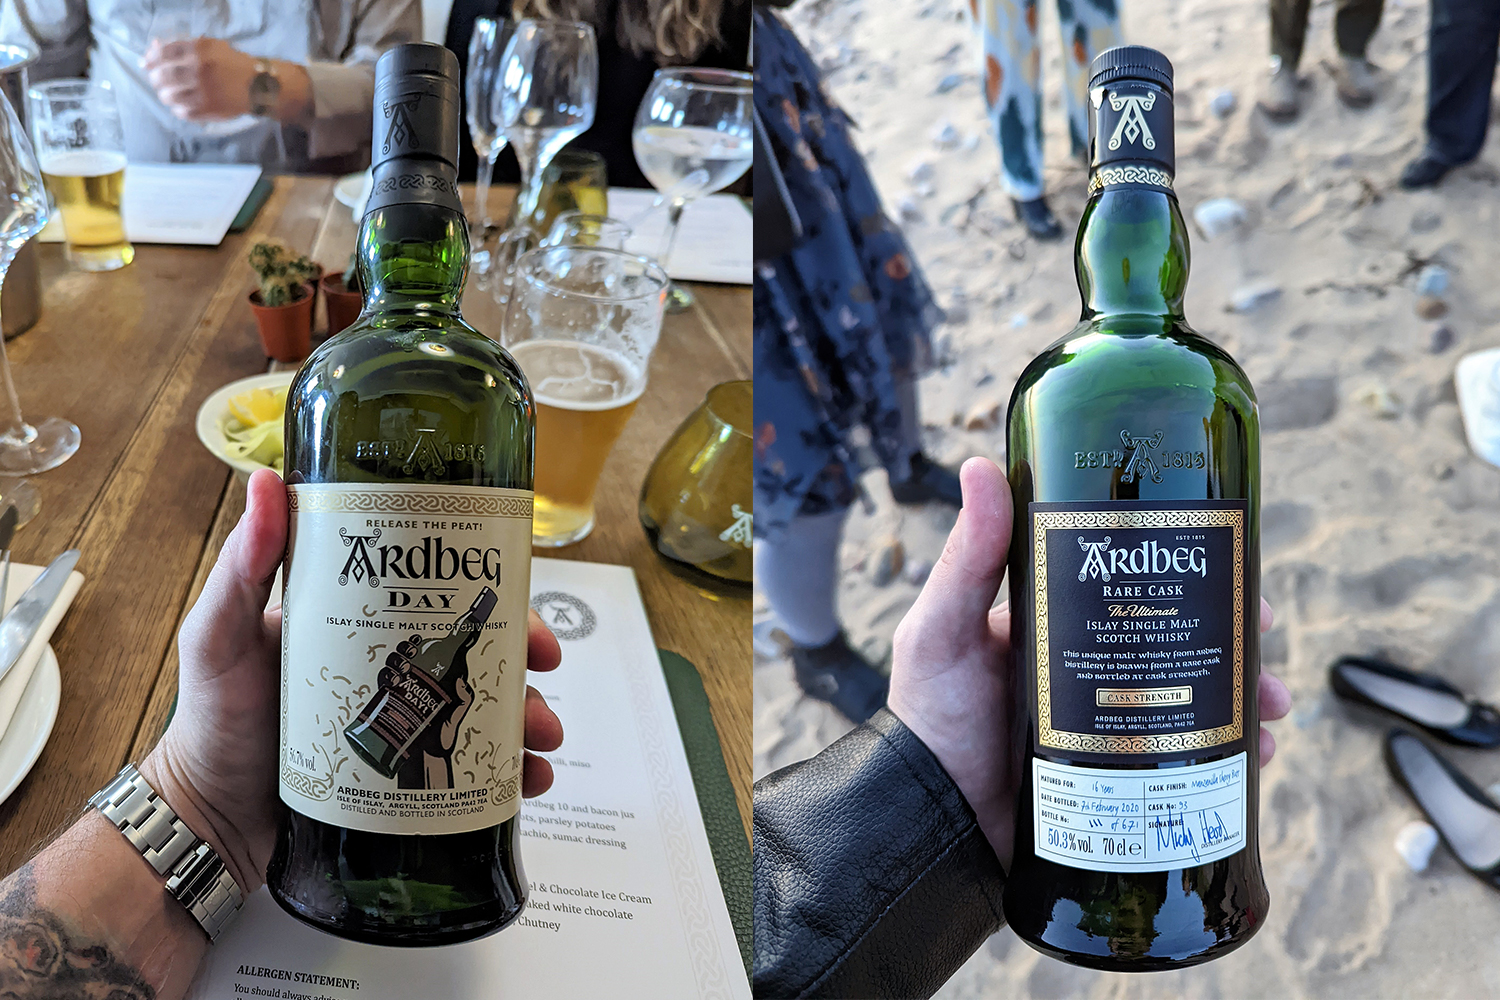 Two bottles of Ardbeg Scotch whisky held in the hand of writer Jake Emen who visited Islay, Scotland during Ardbeg Day 2022